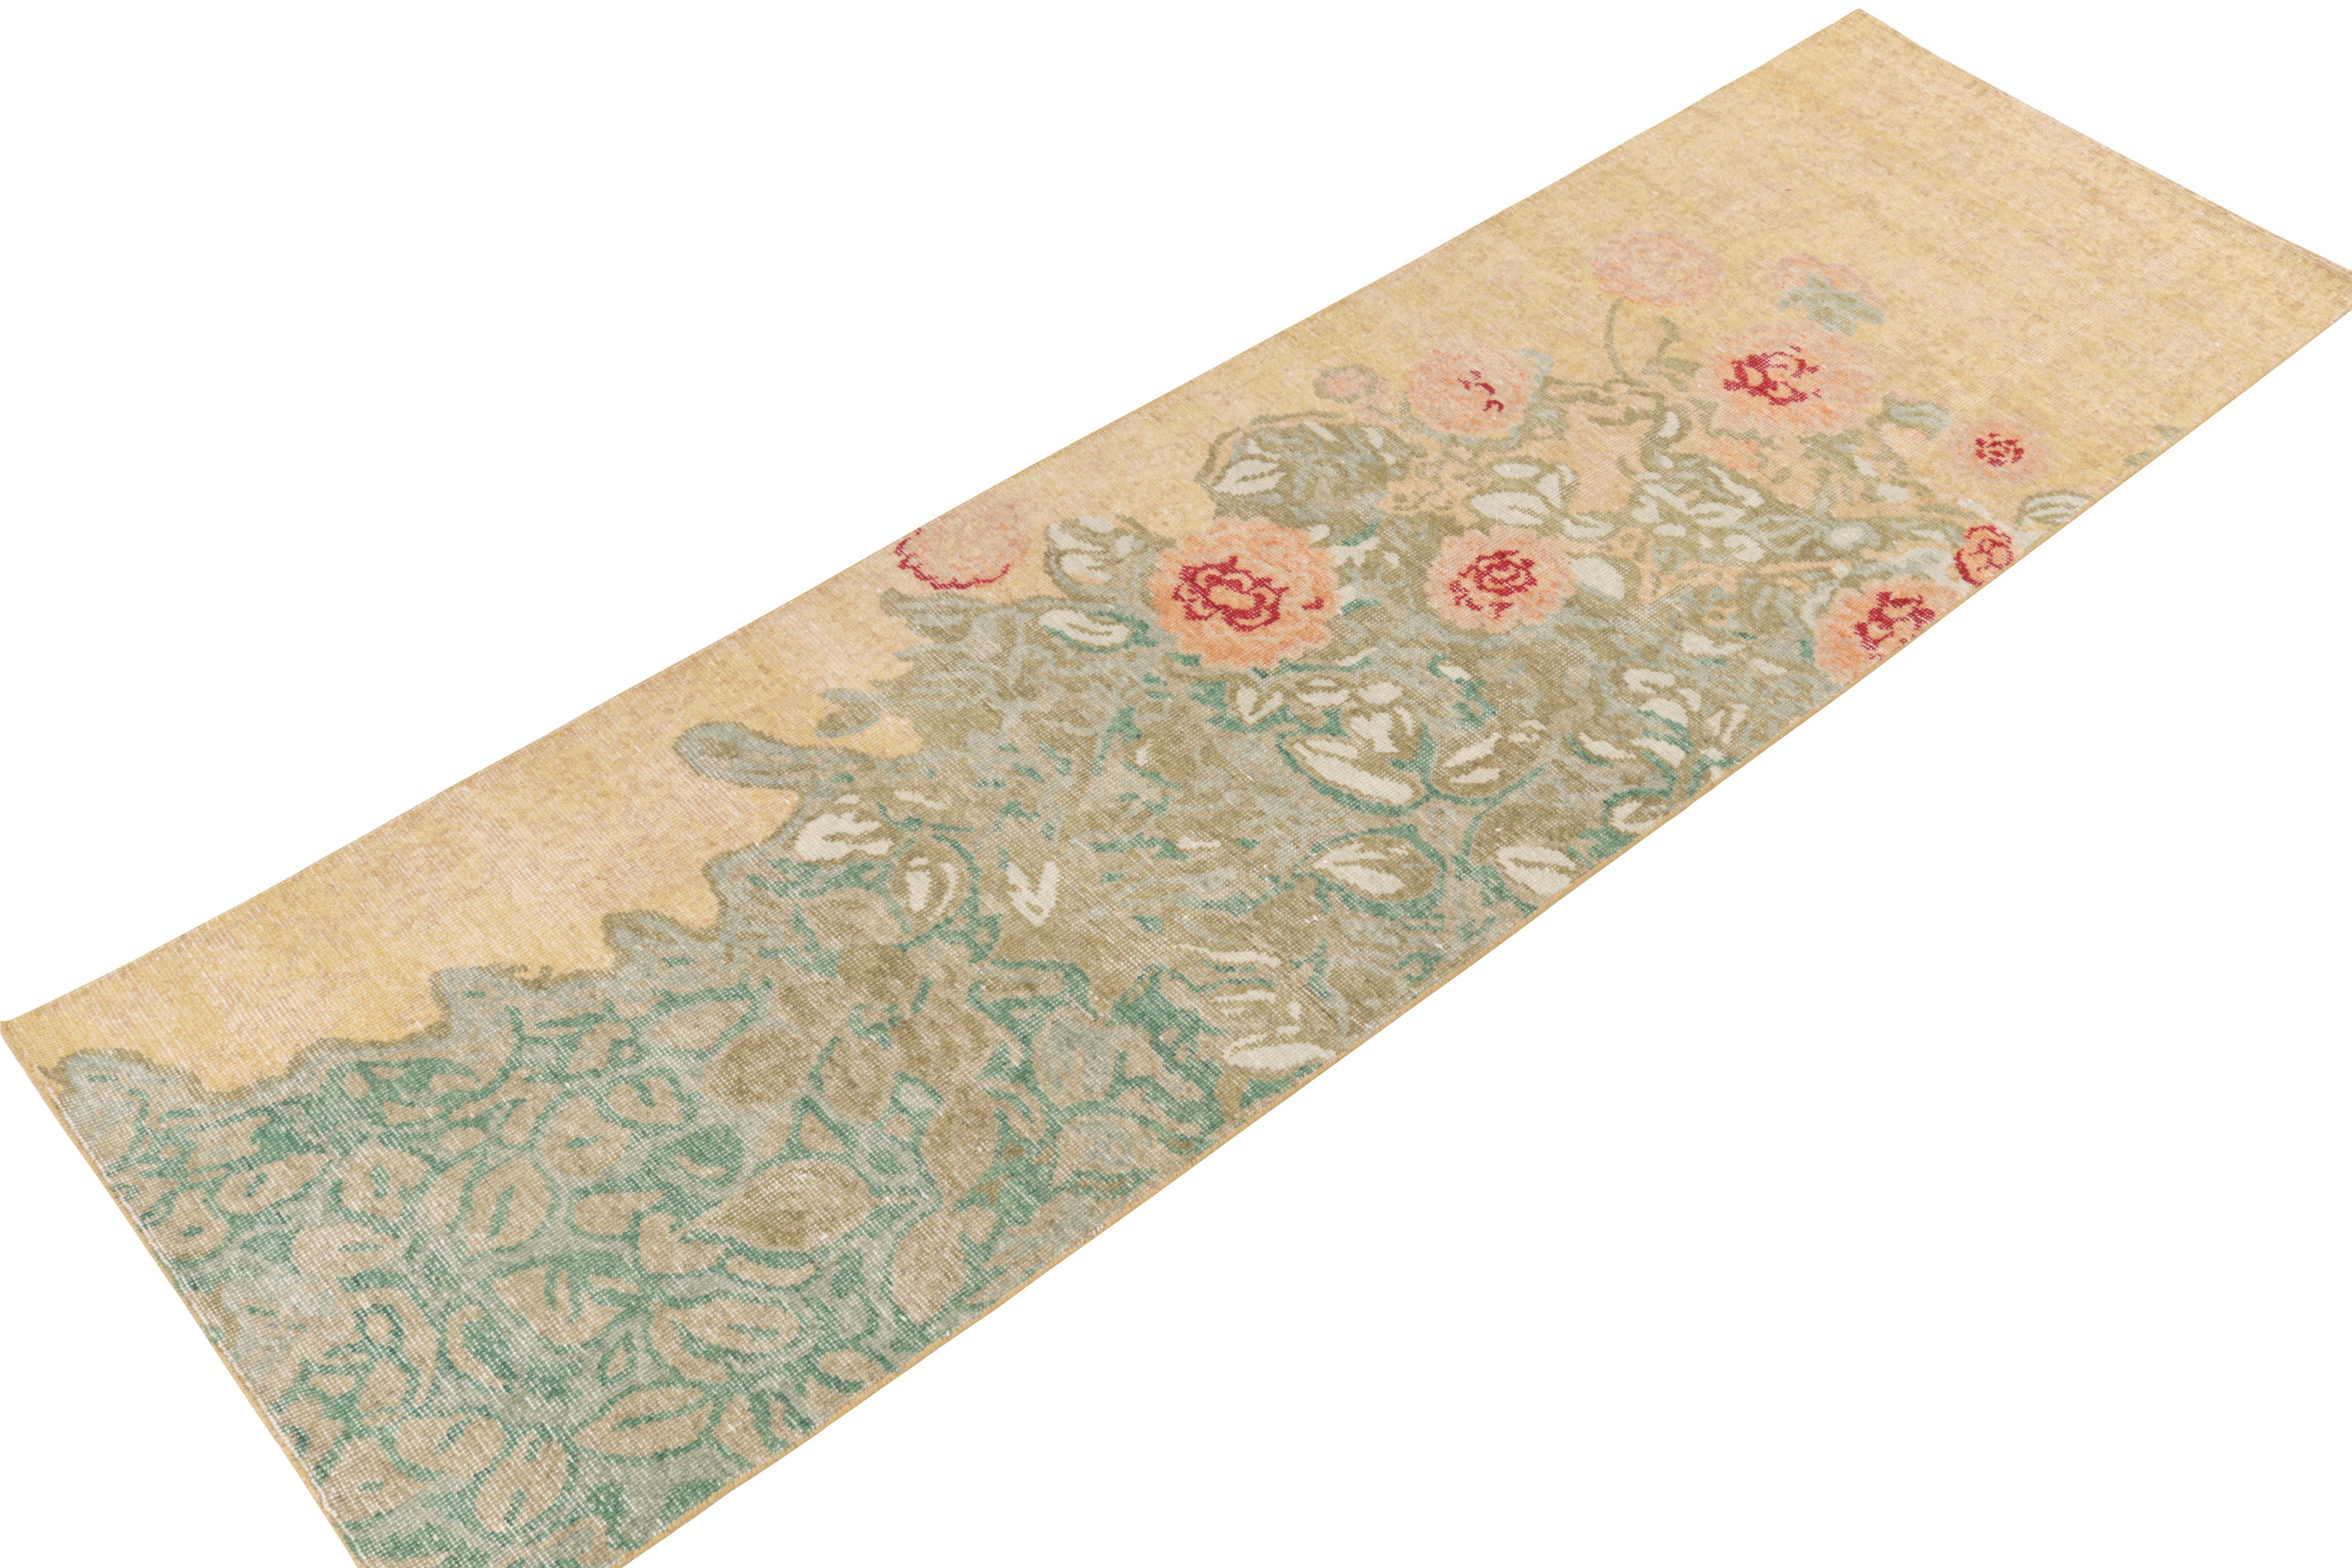 Indian Rug & Kilim's Distressed Style Runner in Beige, Peach and Green Floral Pattern For Sale